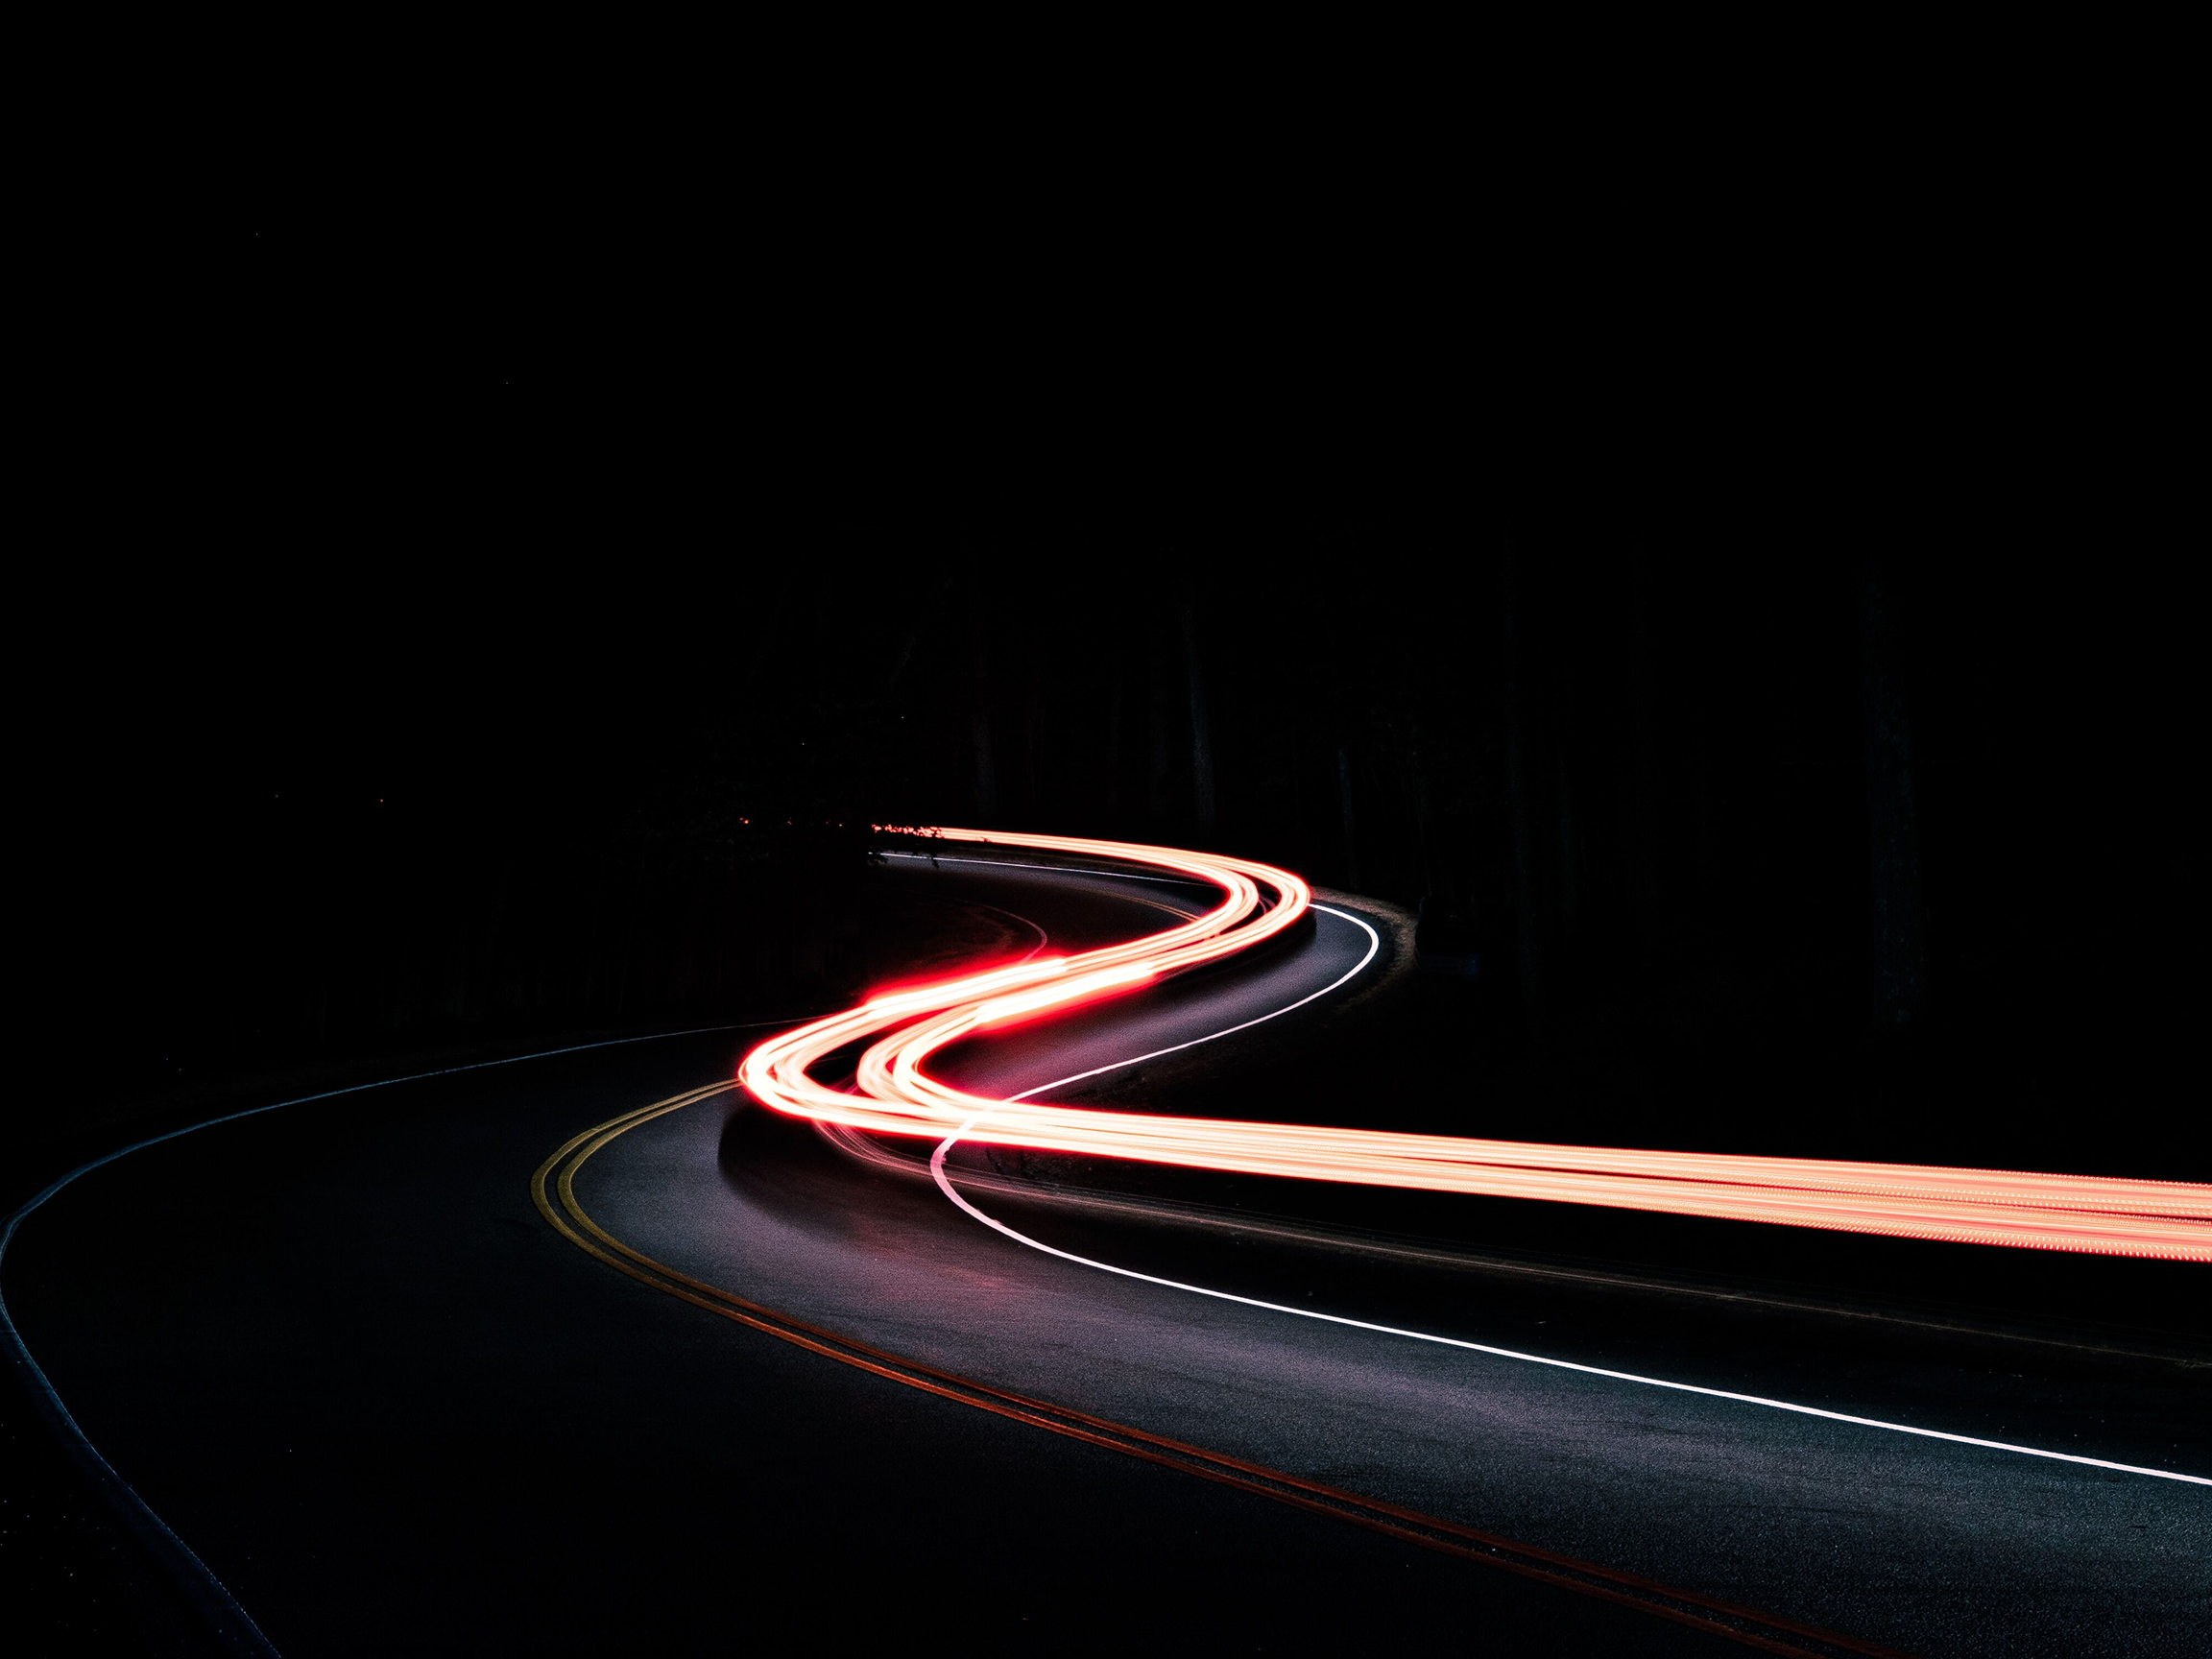 Image of curvy road on black background. On the road are light tails in red.